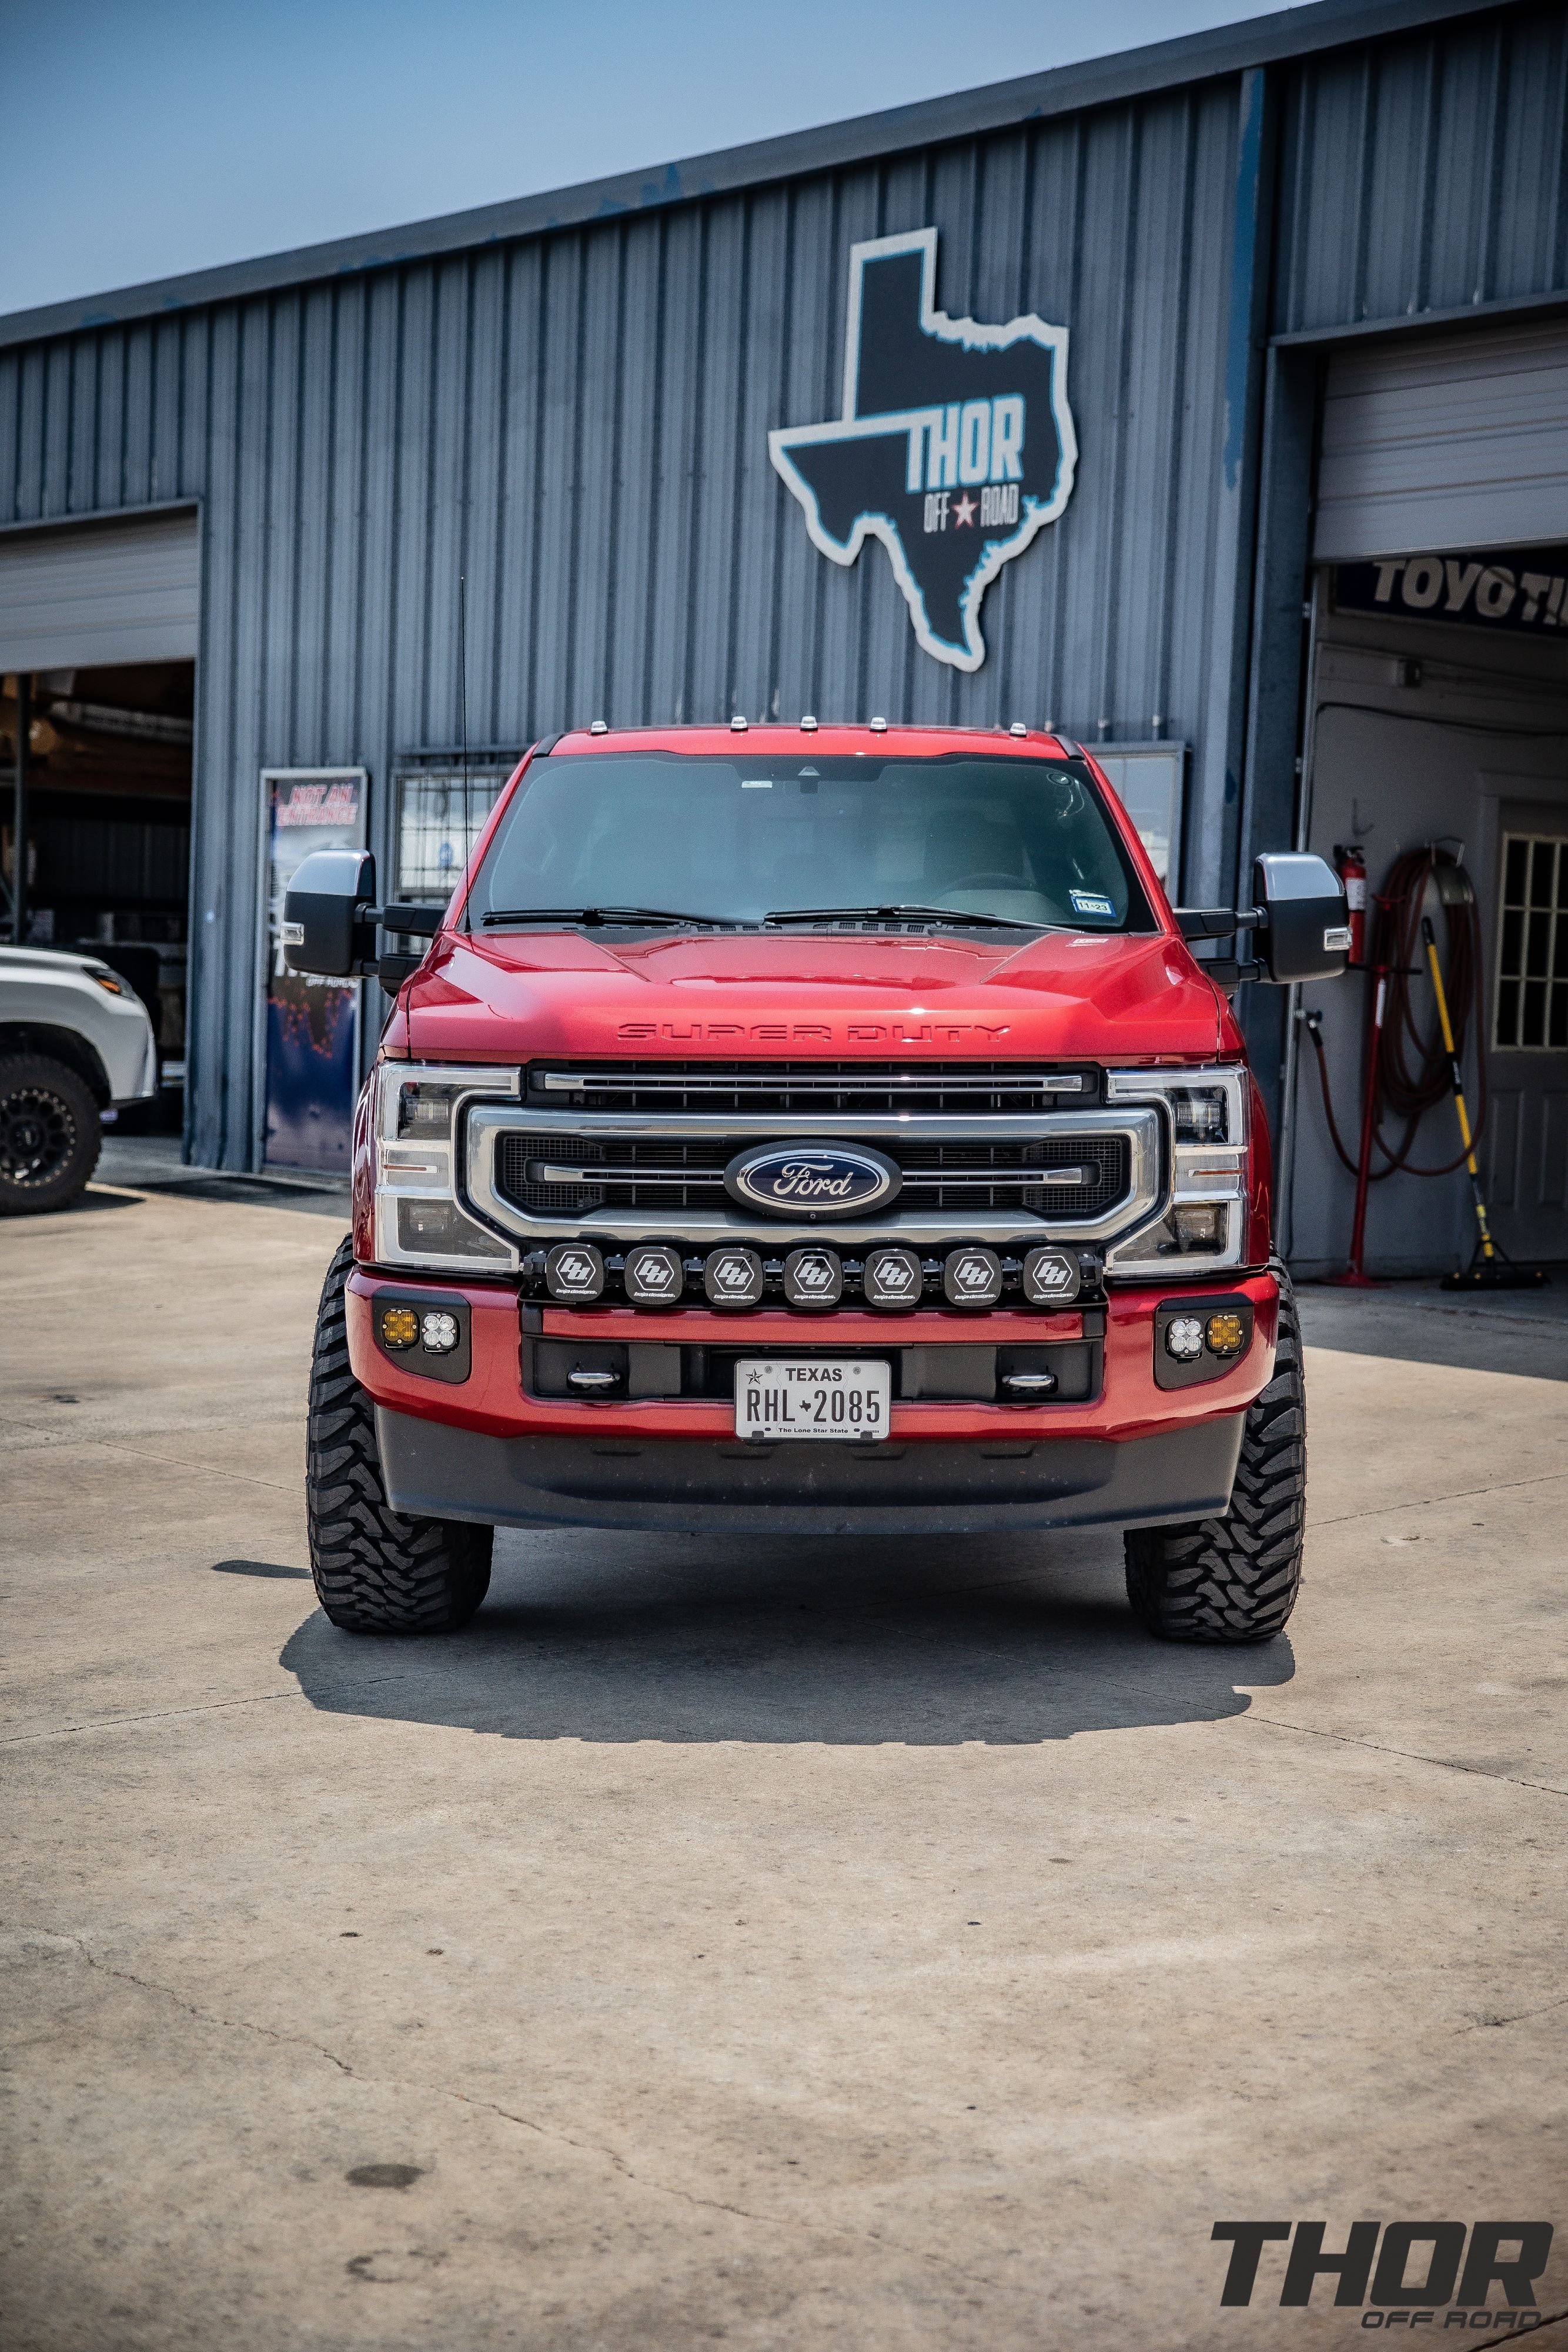 2022 Ford F-250 Super Duty Platinum in Red with Carli Backcountry 3.5" Suspension Kit, Carli 3.5" Fabricated Radius Arms, Carli 3.5" Full Rear Spring Replacement, Carli High Mount Steering Stabilizer, Carli Low Mount Steering Stabilizer, Carli Torsion Sway Bar, Method Racing MR304 17" Machined Wheels, 37x13.50R17 Toyo Open Country Tires, Baja Design Linkable Light Kit, Baja Design Fog Light Pocket Kit, Baja Design S2 Flush Mount Lights, Banks Differential Cover, Banks Exhaust Kit